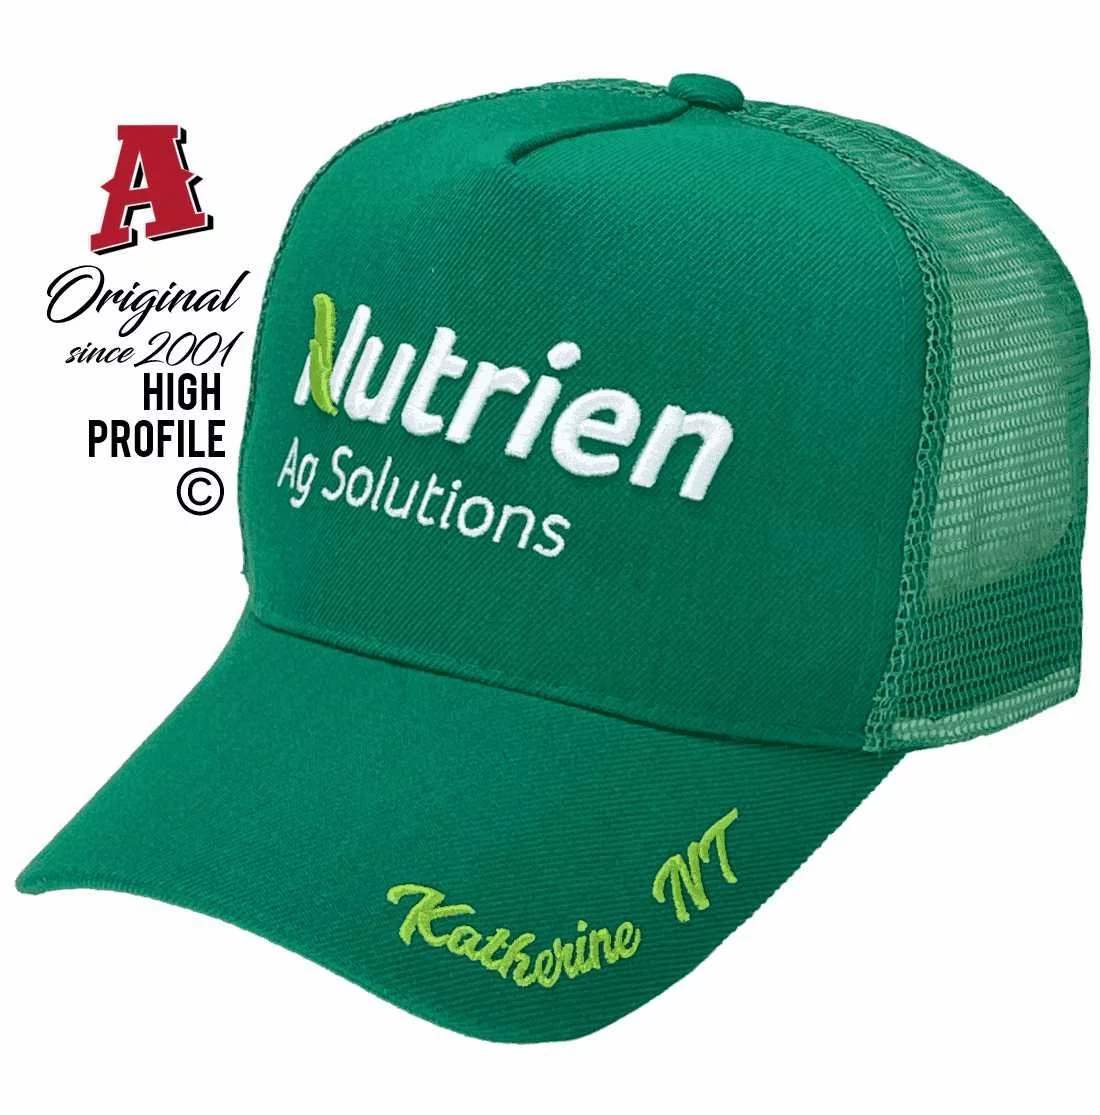 Nutrien Ag Solutions Katherine NT Midrange Aussie Trucker Hats with Australian HeadFit Crown  3d embroidery and 3d embroidery on brim Green with Green mesh Snapback